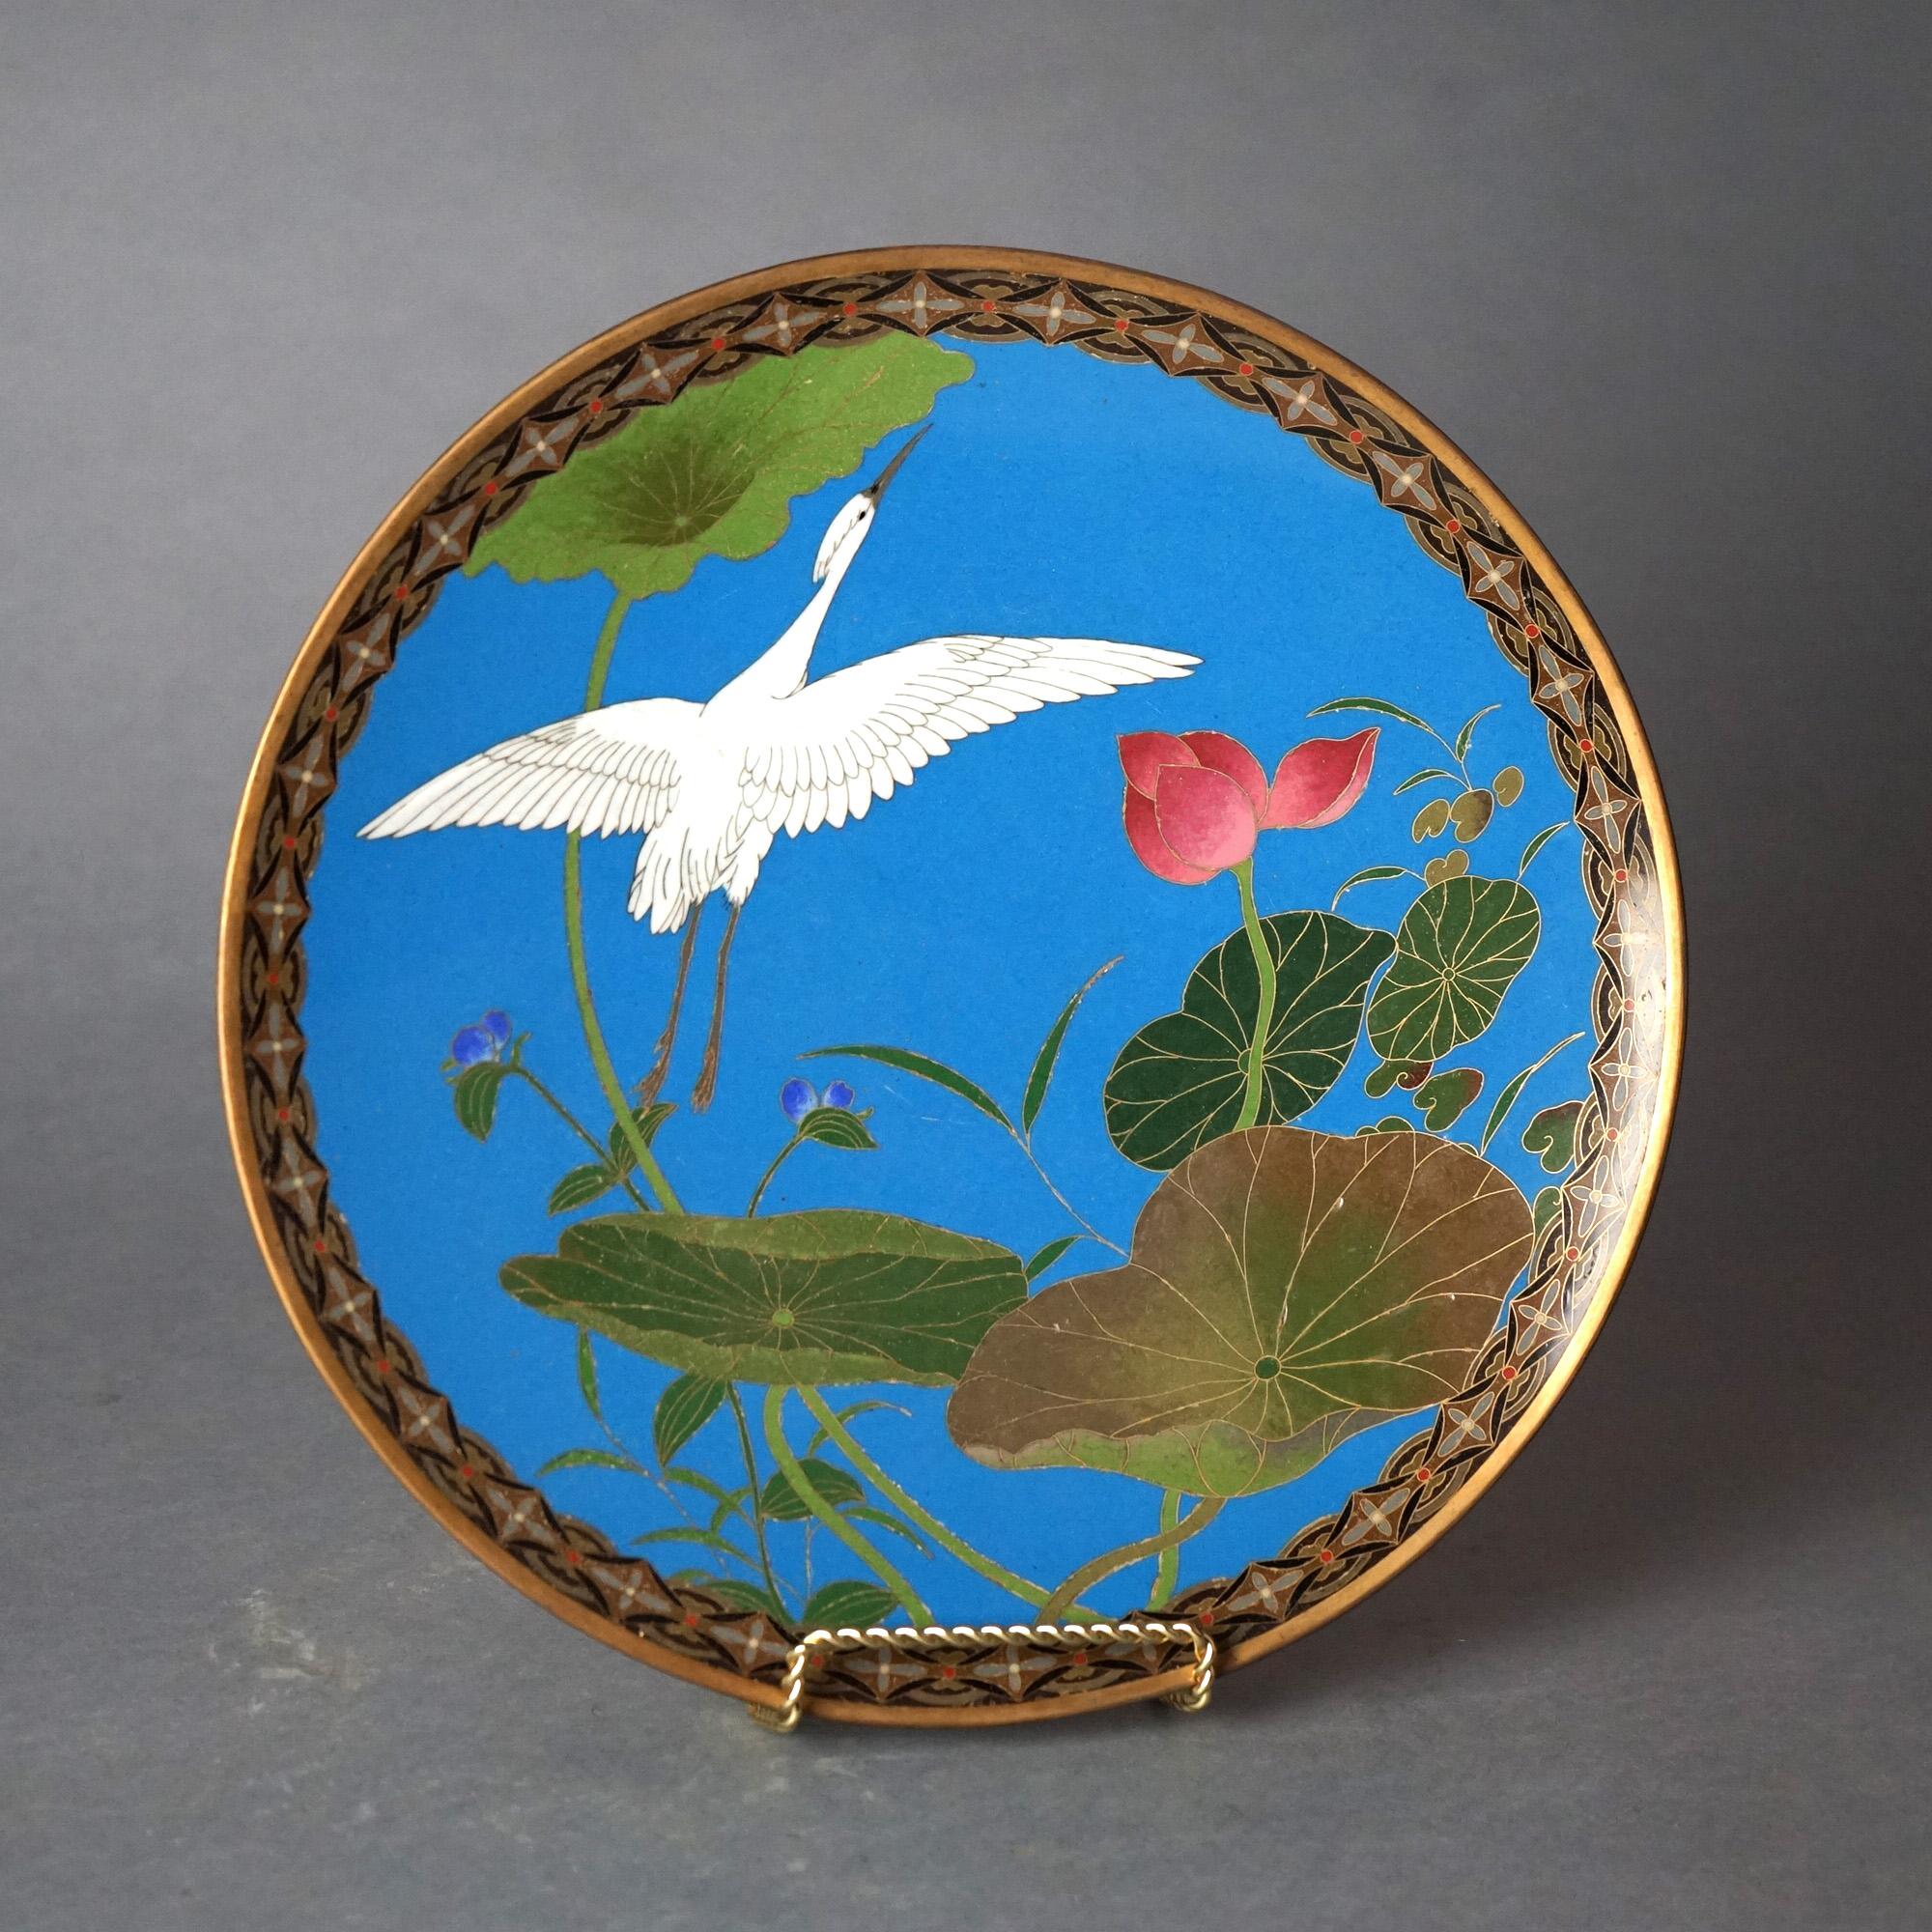 Antique Japanese Meiji Cloisonné Enameled Plate with Pond, Water Lily & Heron C1920

Measures - 9.5